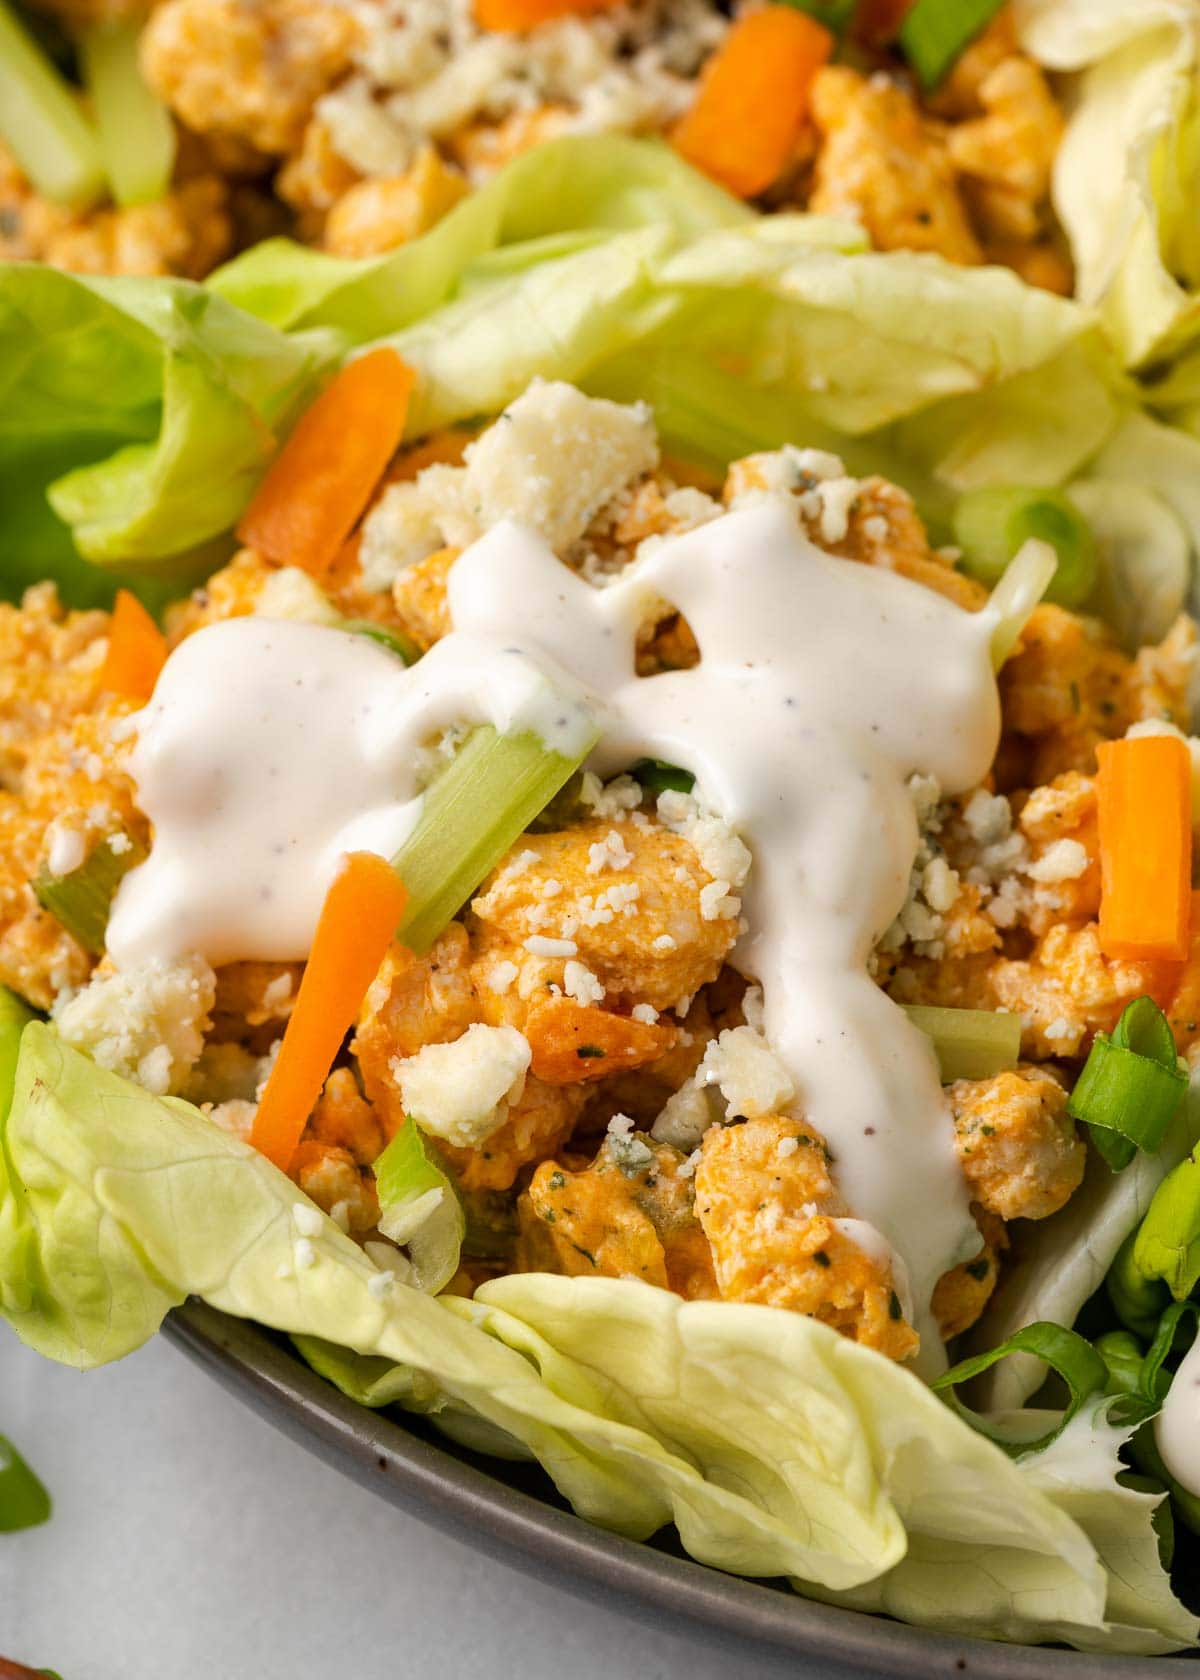 These easy Buffalo Chicken Lettuce Wraps make the best low-carb lunch or dinner! This super flavorful recipe is naturally keto-friendly, gluten-free, healthy, and easy to make ahead of time.